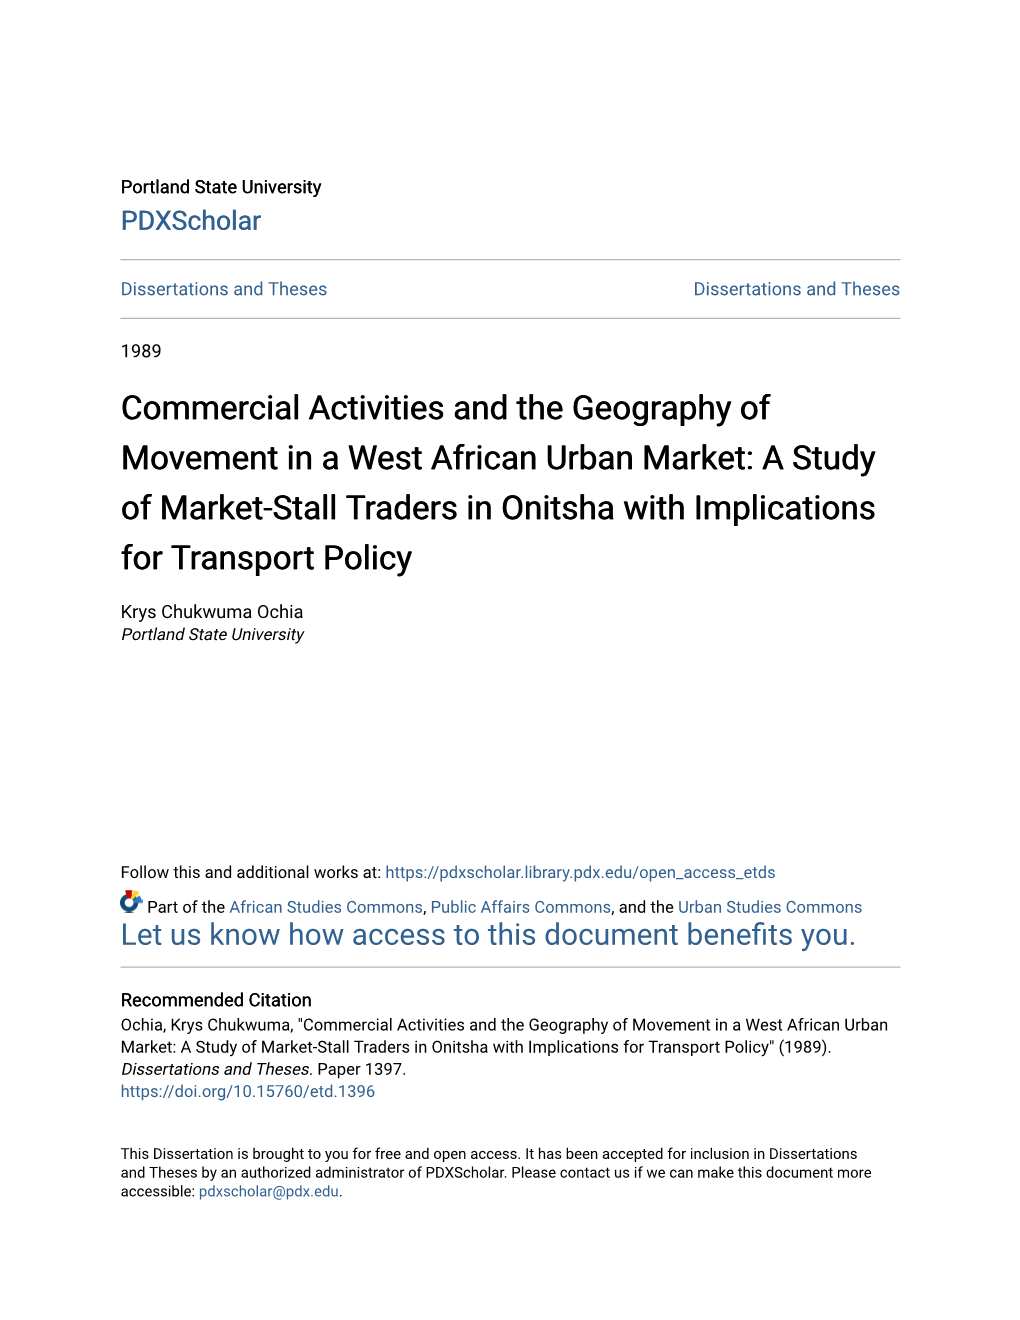 A Study of Market-Stall Traders in Onitsha with Implications for Transport Policy